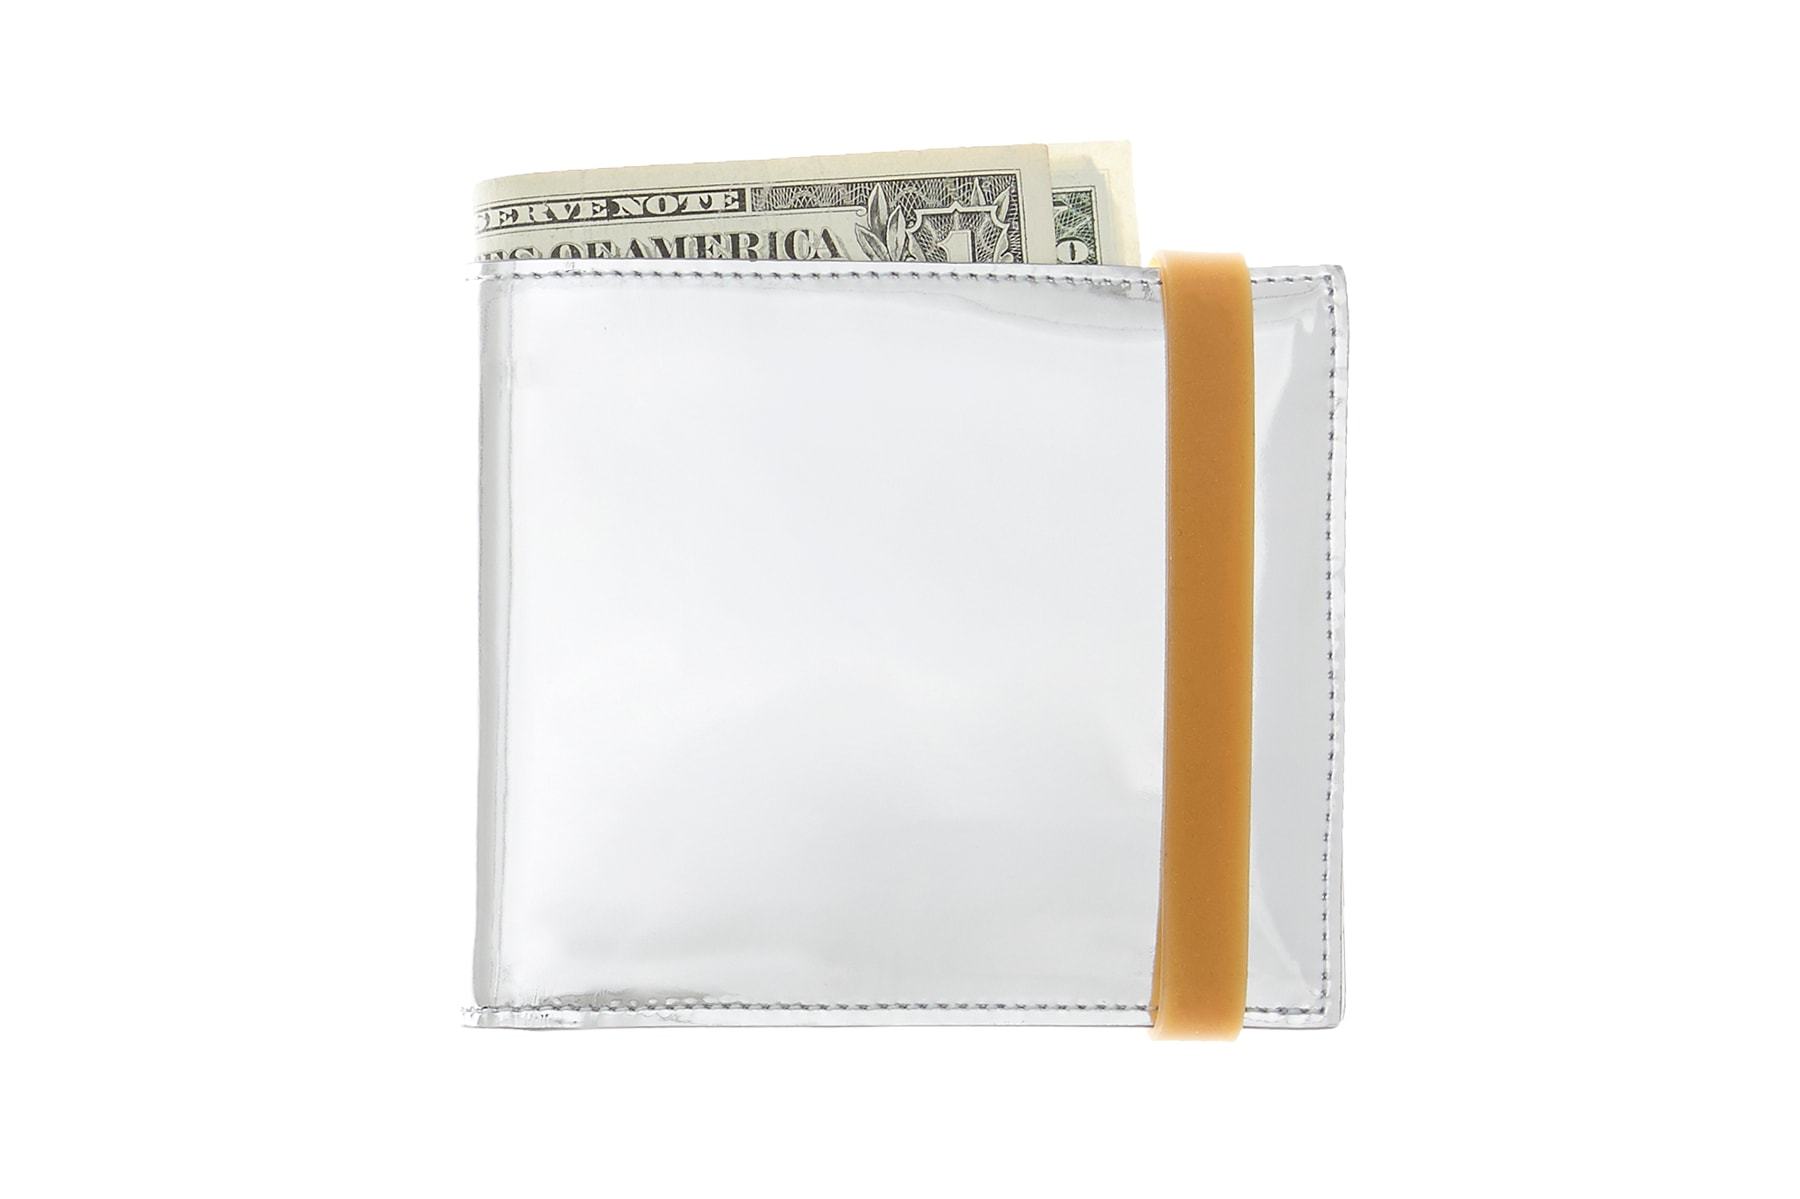 helmut lang re edition byronesque collection metallic wallet rubber band money 2004